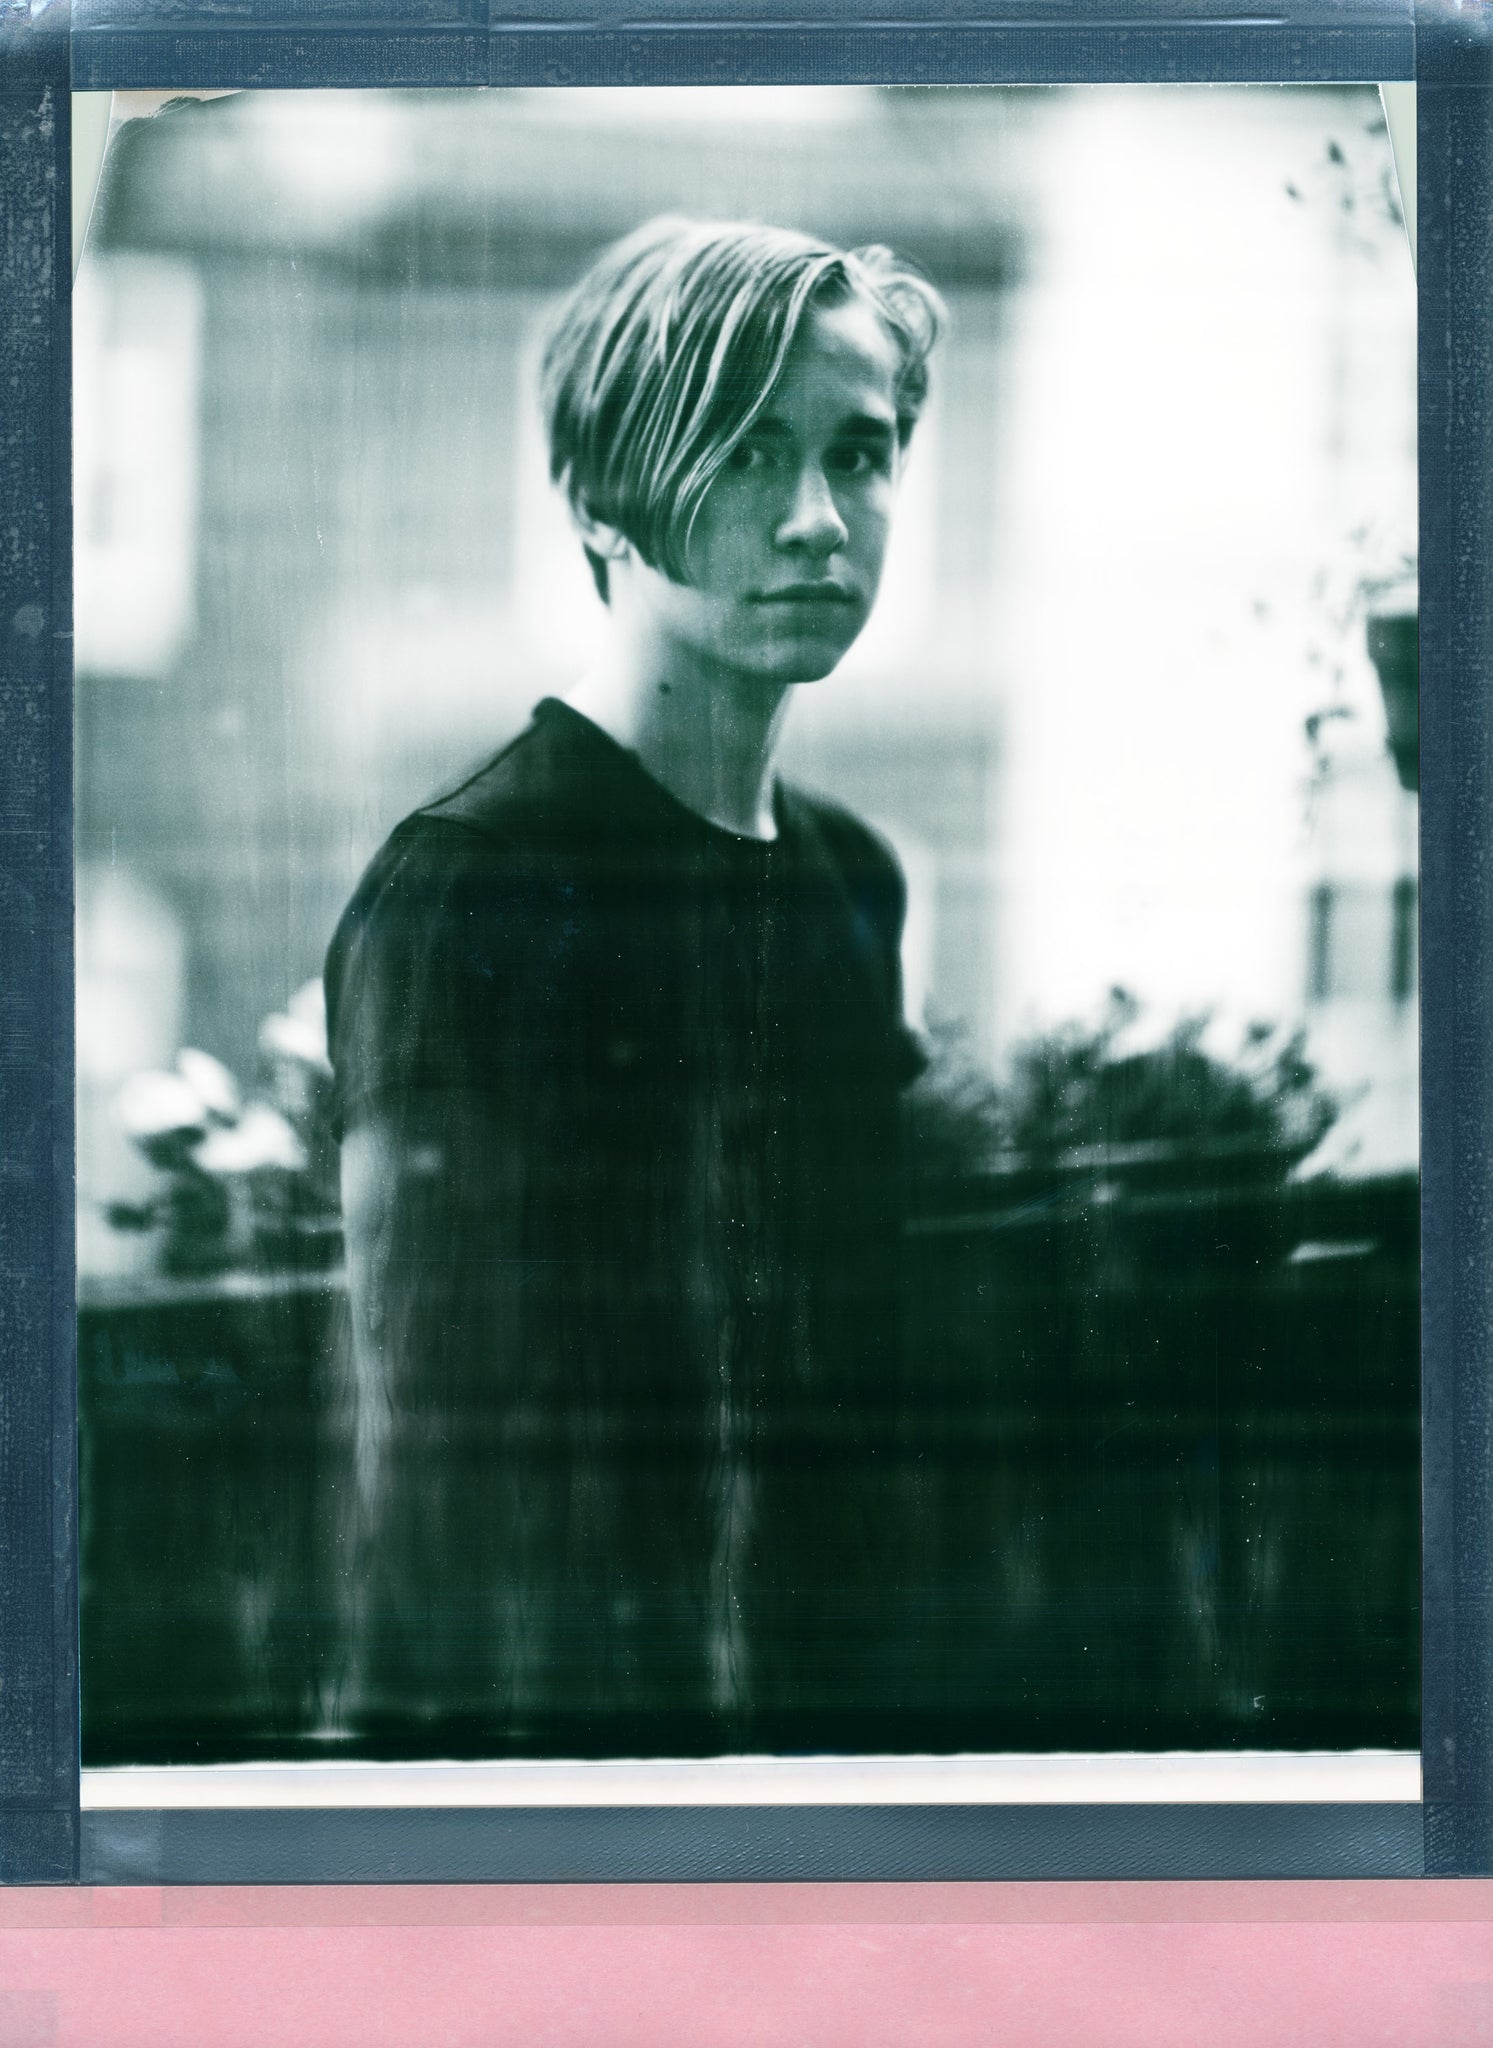 Voigtlander 30cm Collinear f6 on Sinar P2 8x10" with Impossible Silver Shade Polaroid